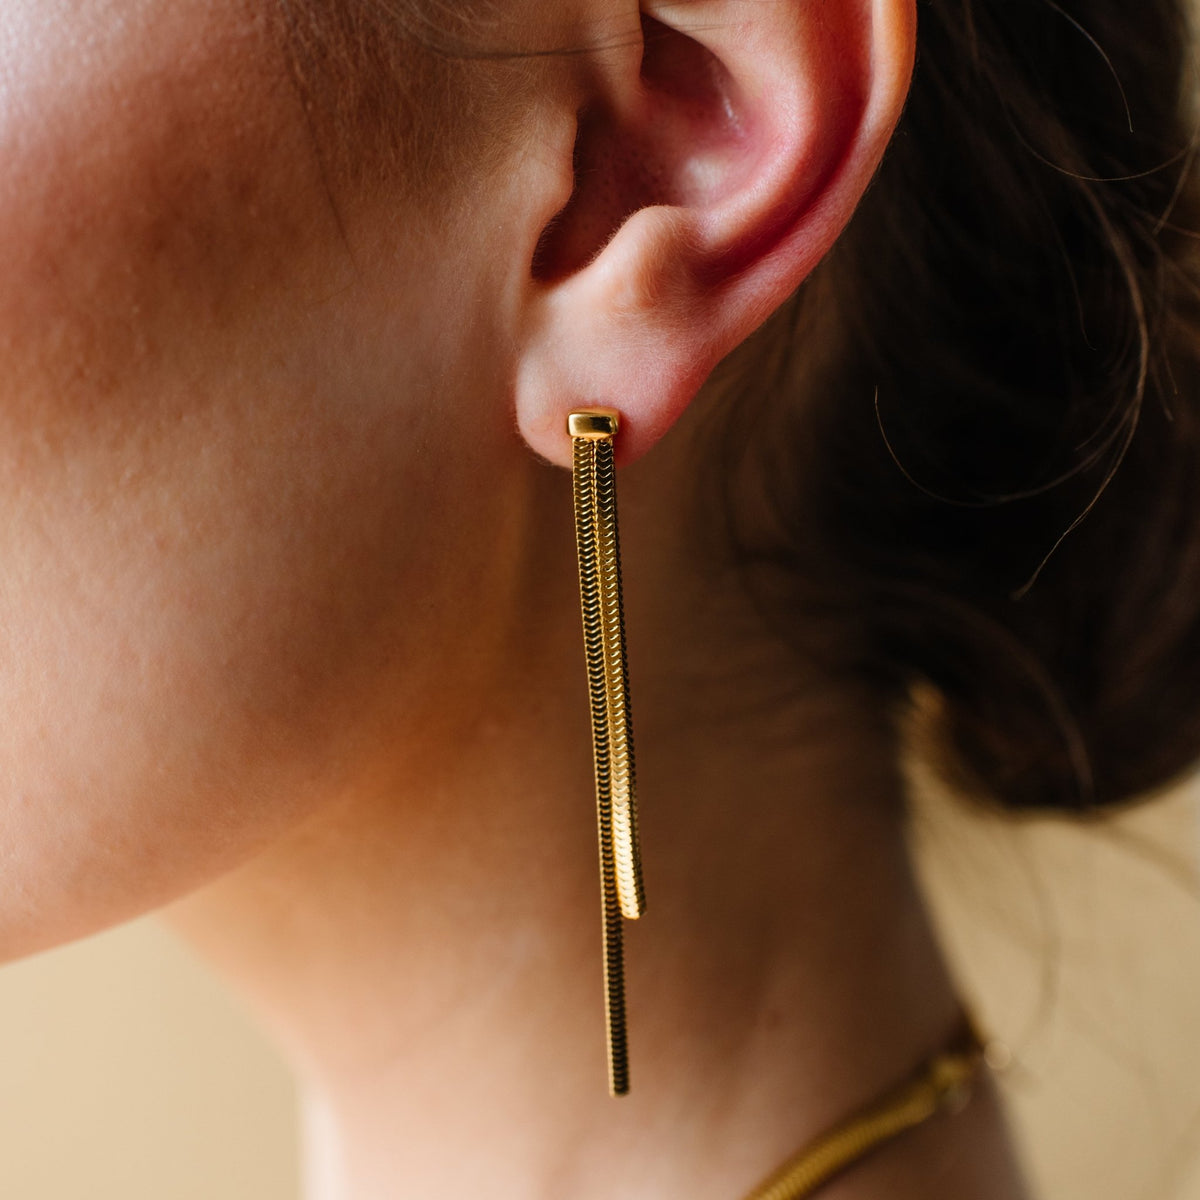 FEARLESS COBRA DUSTER EARRINGS - GOLD - SO PRETTY CARA COTTER